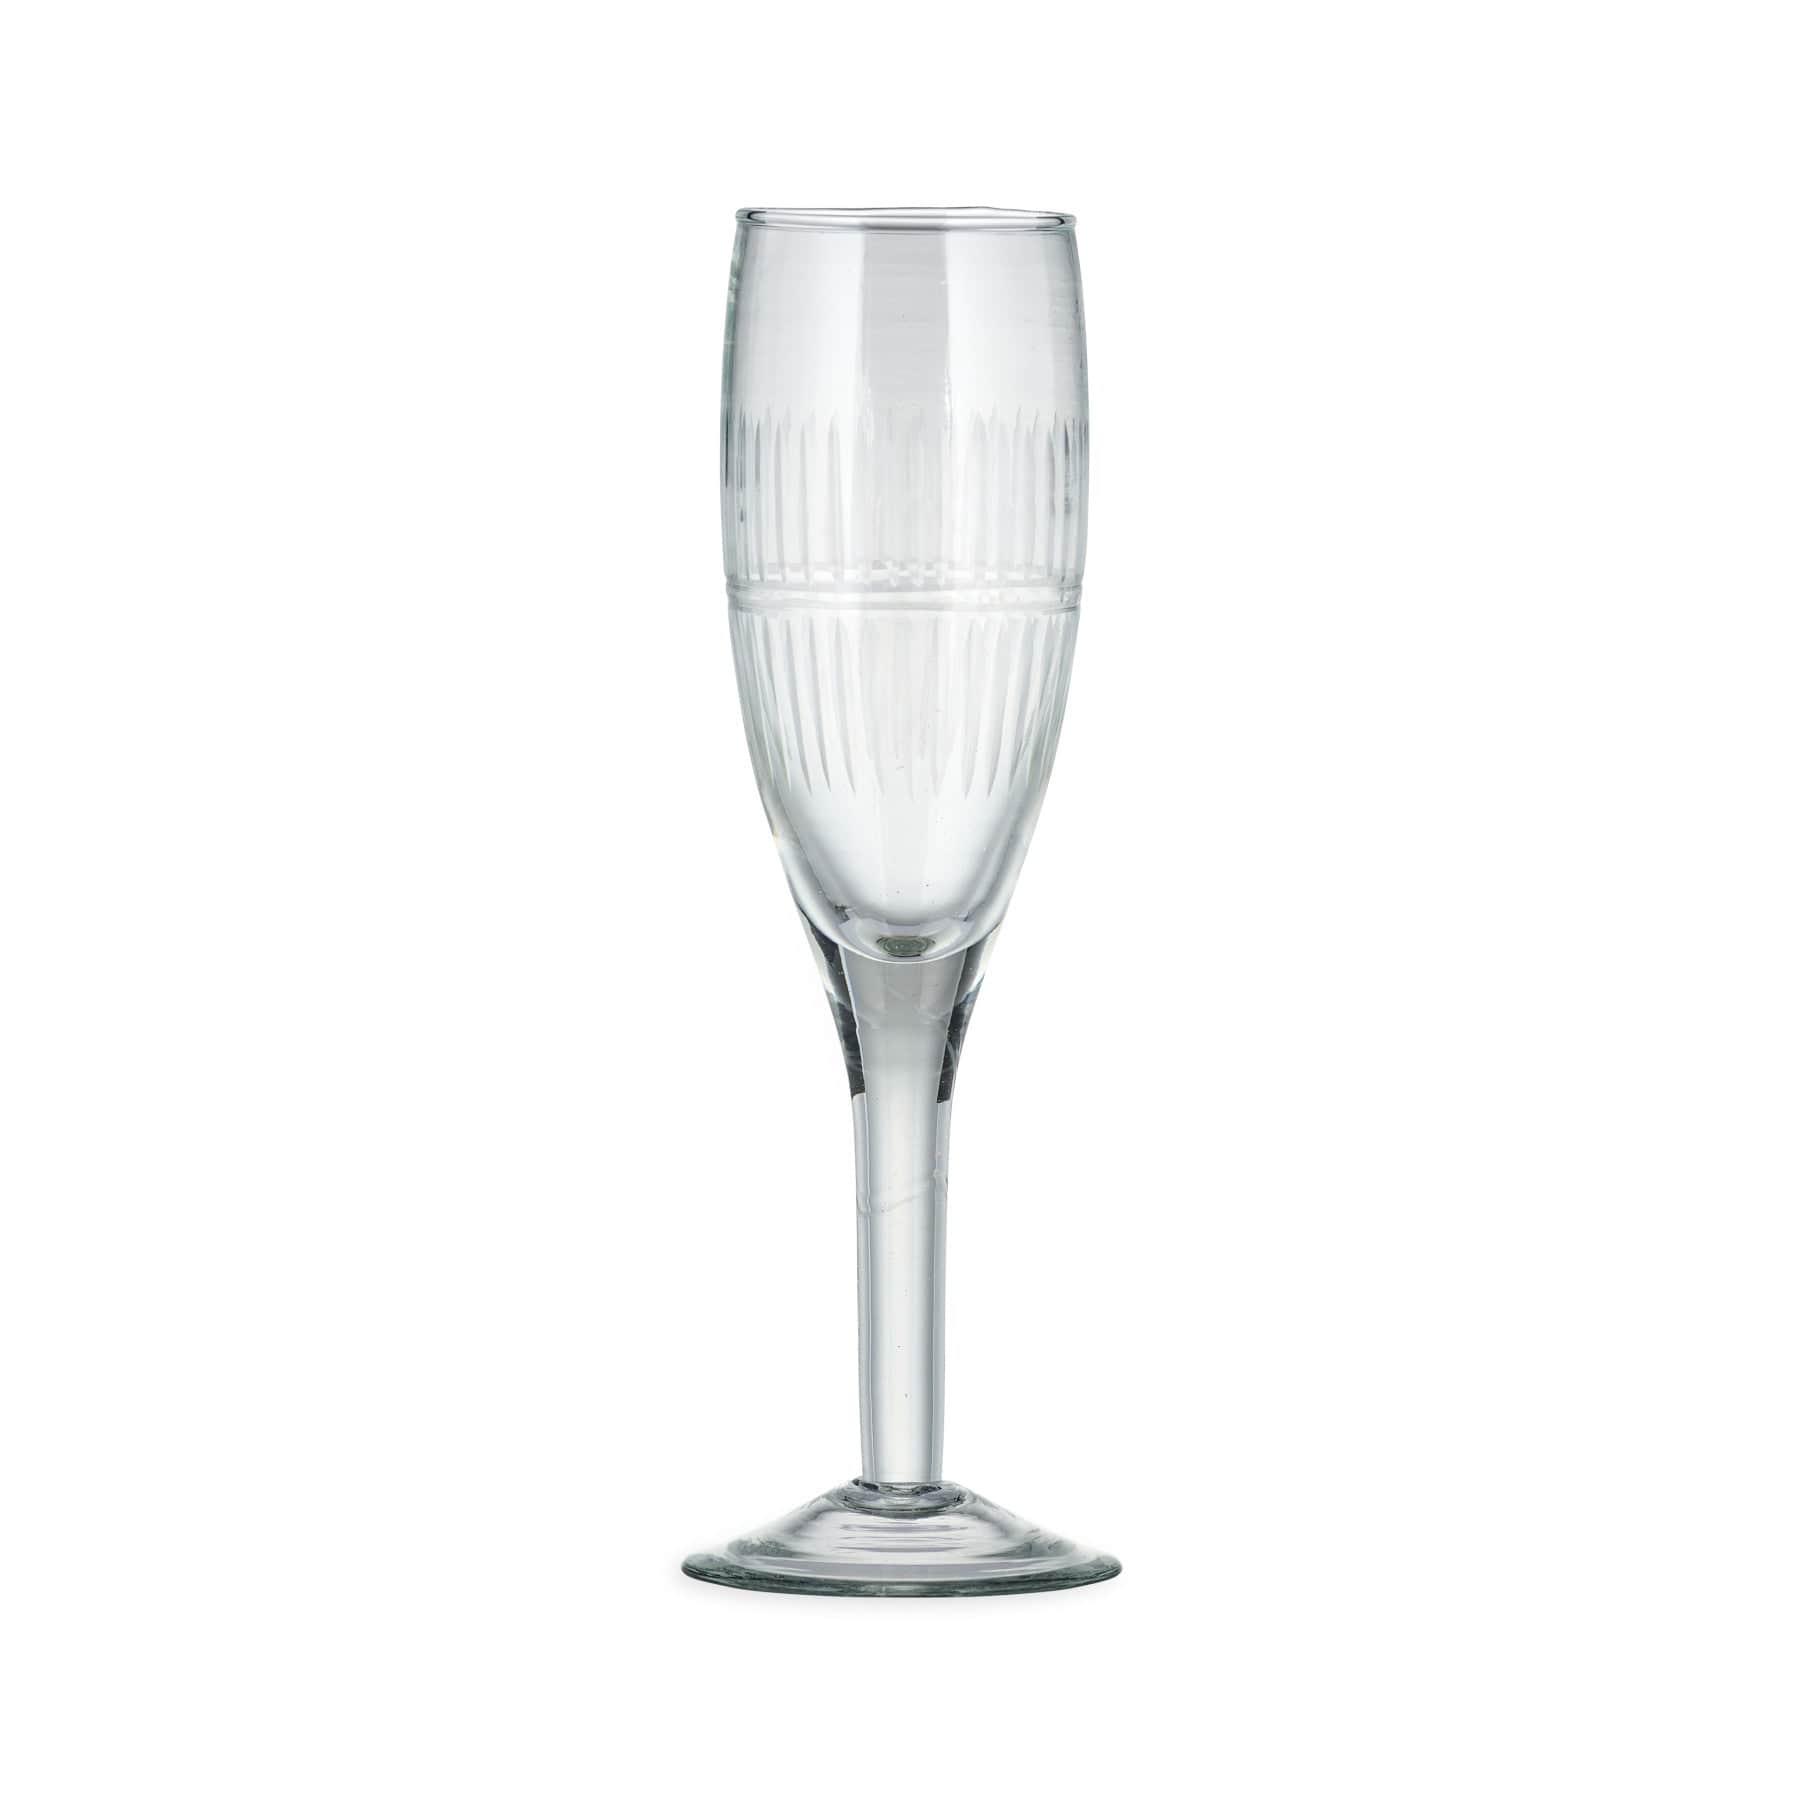 Empty champagne flute glass with ribbed detailing on white background